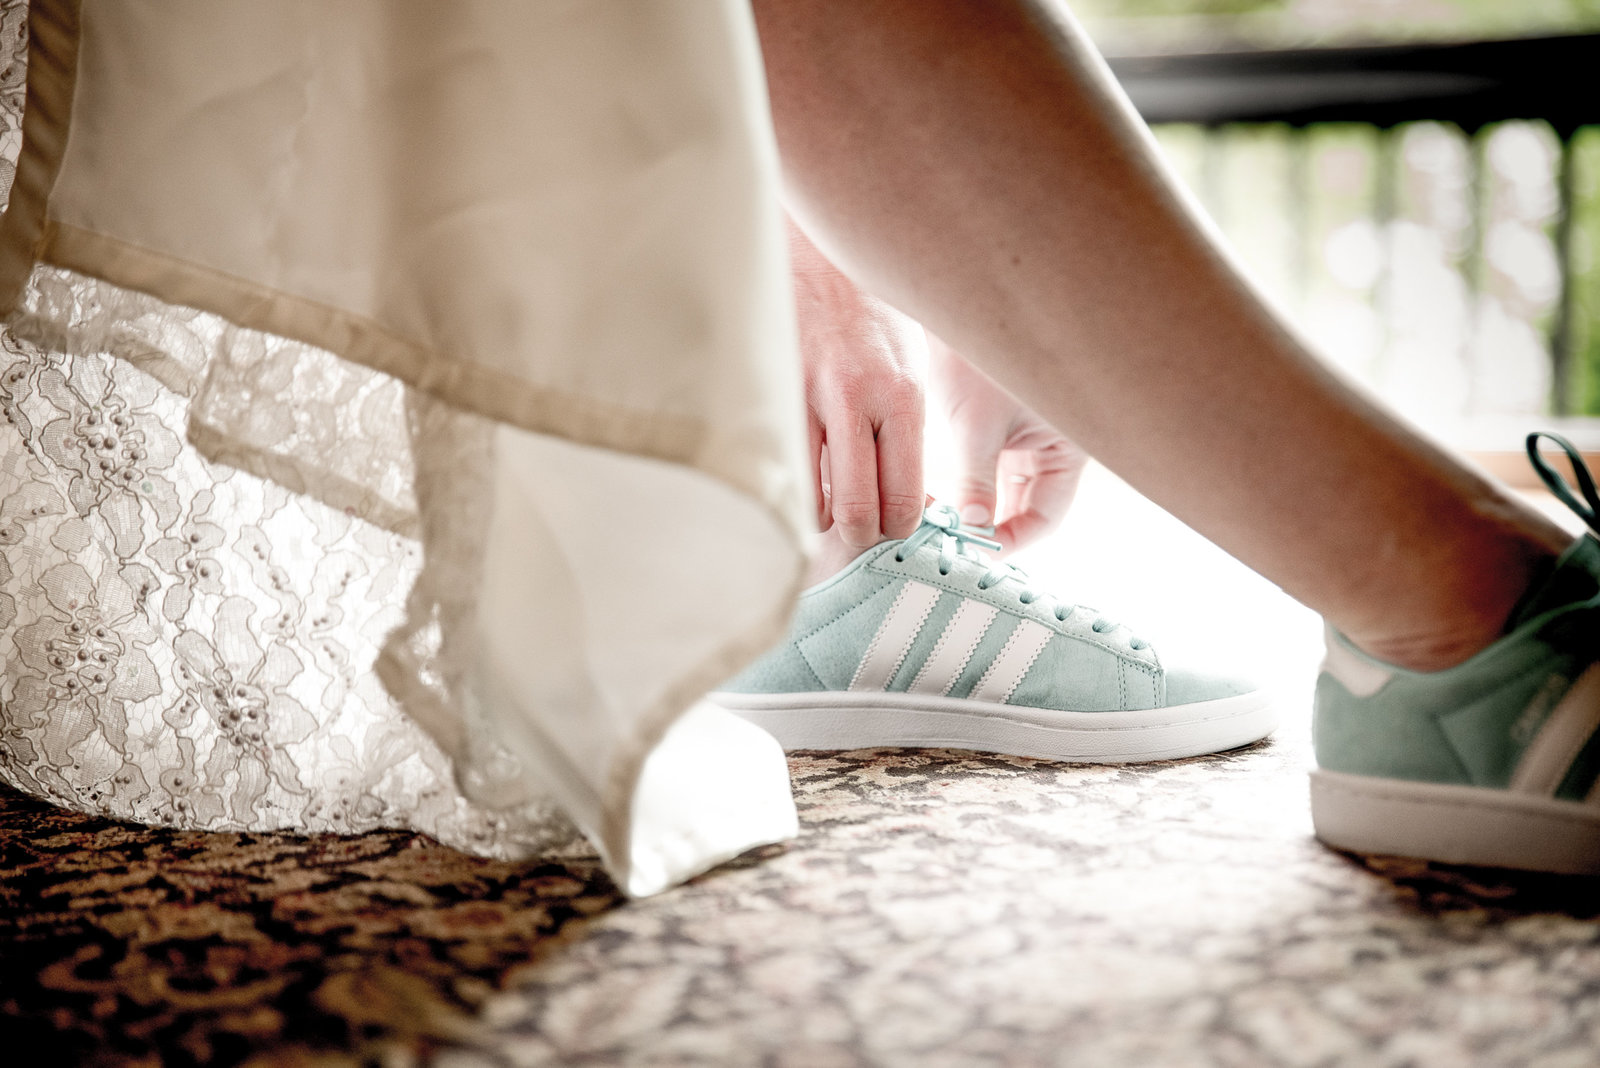 Bride ties the shoelace of her sneaker as she dresses for her wedding